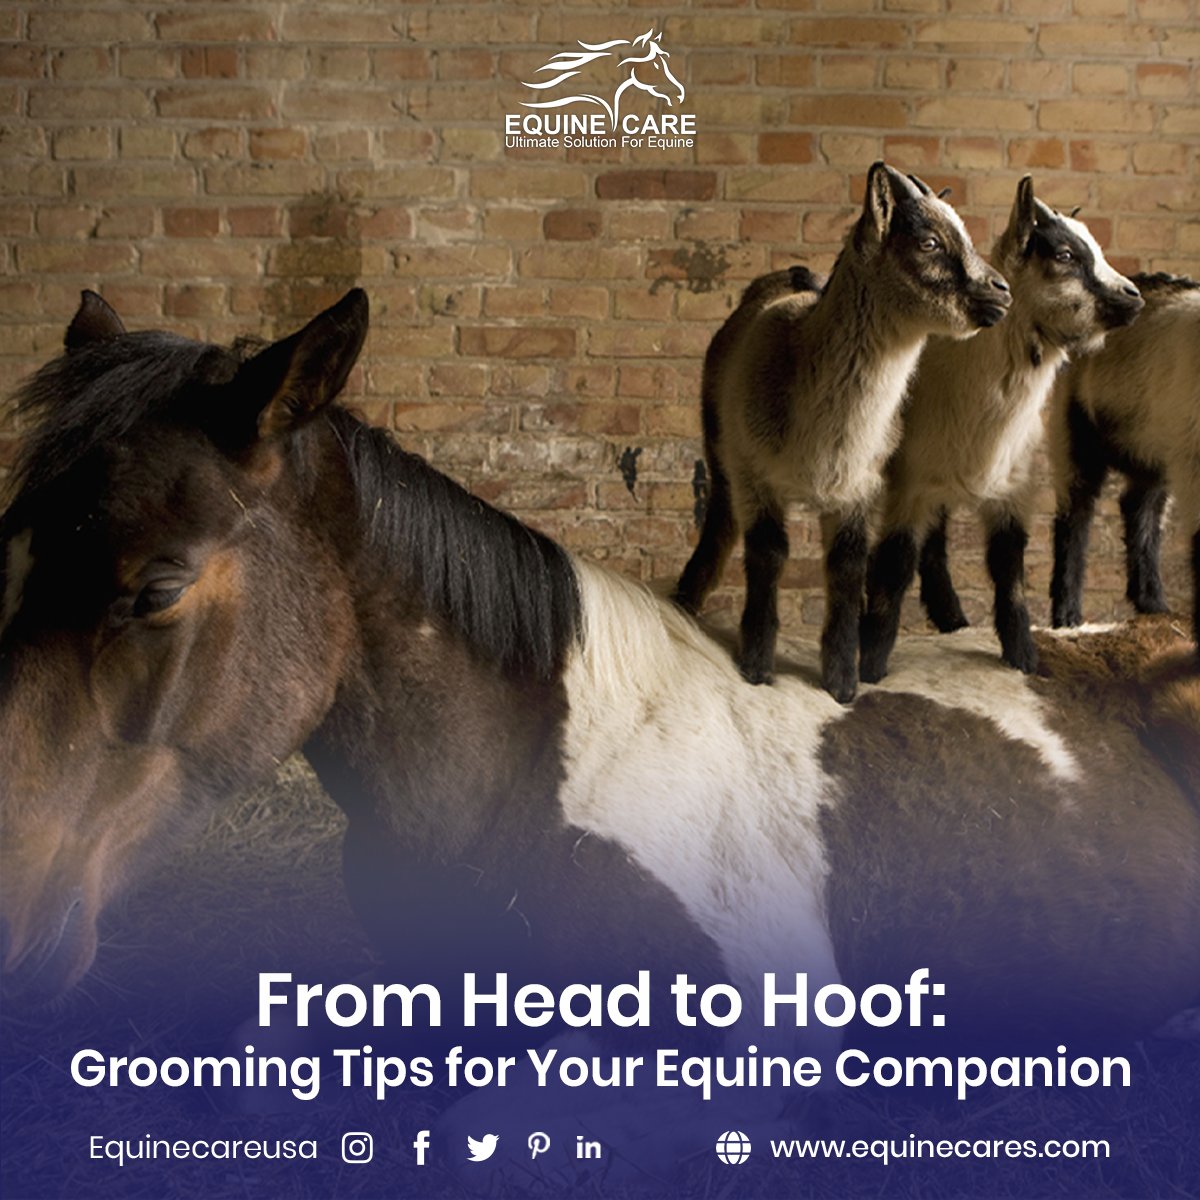 🐴  Our grooming hacks are here to help! From shiny manes to healthy hooves, we've got you covered. Invest in quality tools, care for their mane and tail, maintain healthy hooves, and expand your knowledge. A well-groomed horse is a happy horse! 

#EquineGrooming #HorseCare